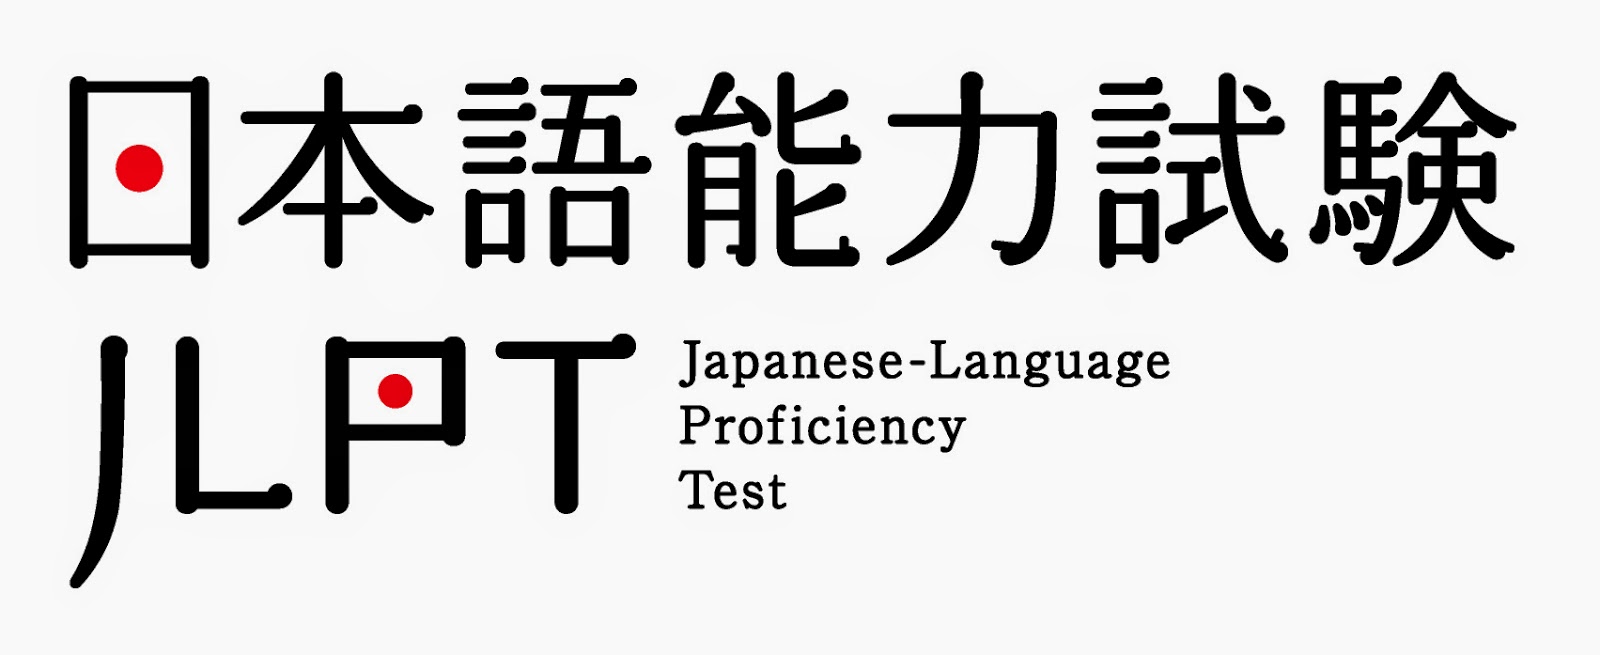 Today was the JLPT Japanese Language Proficiency Test.